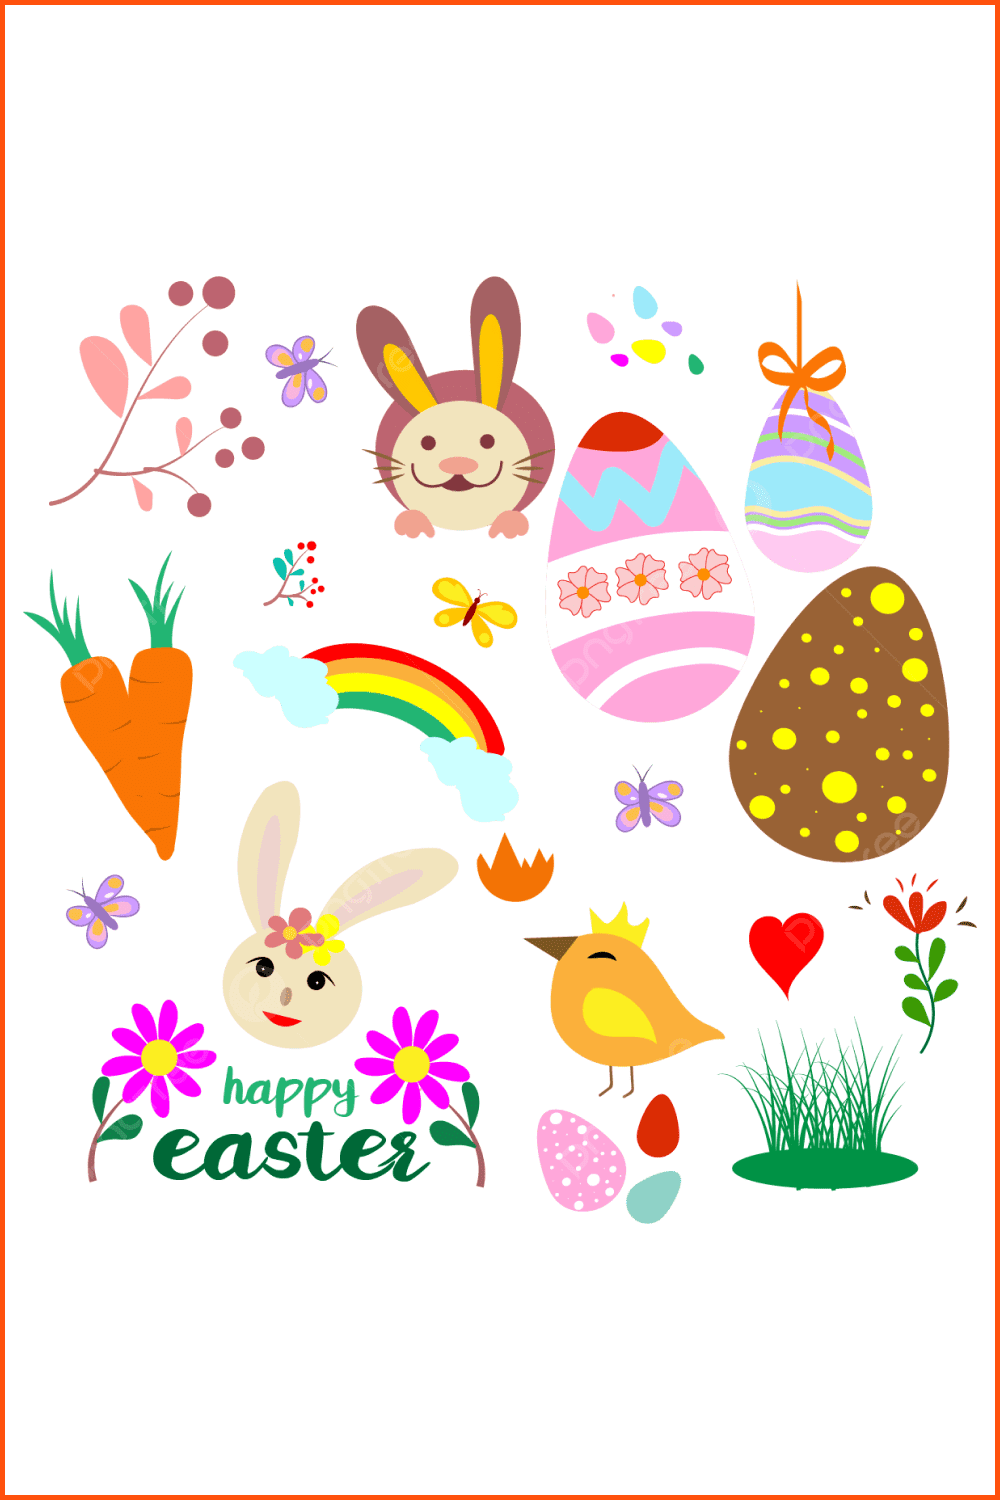 Collage of drawn rabbits, eggs, carrots, flowers, rainbows and birds.